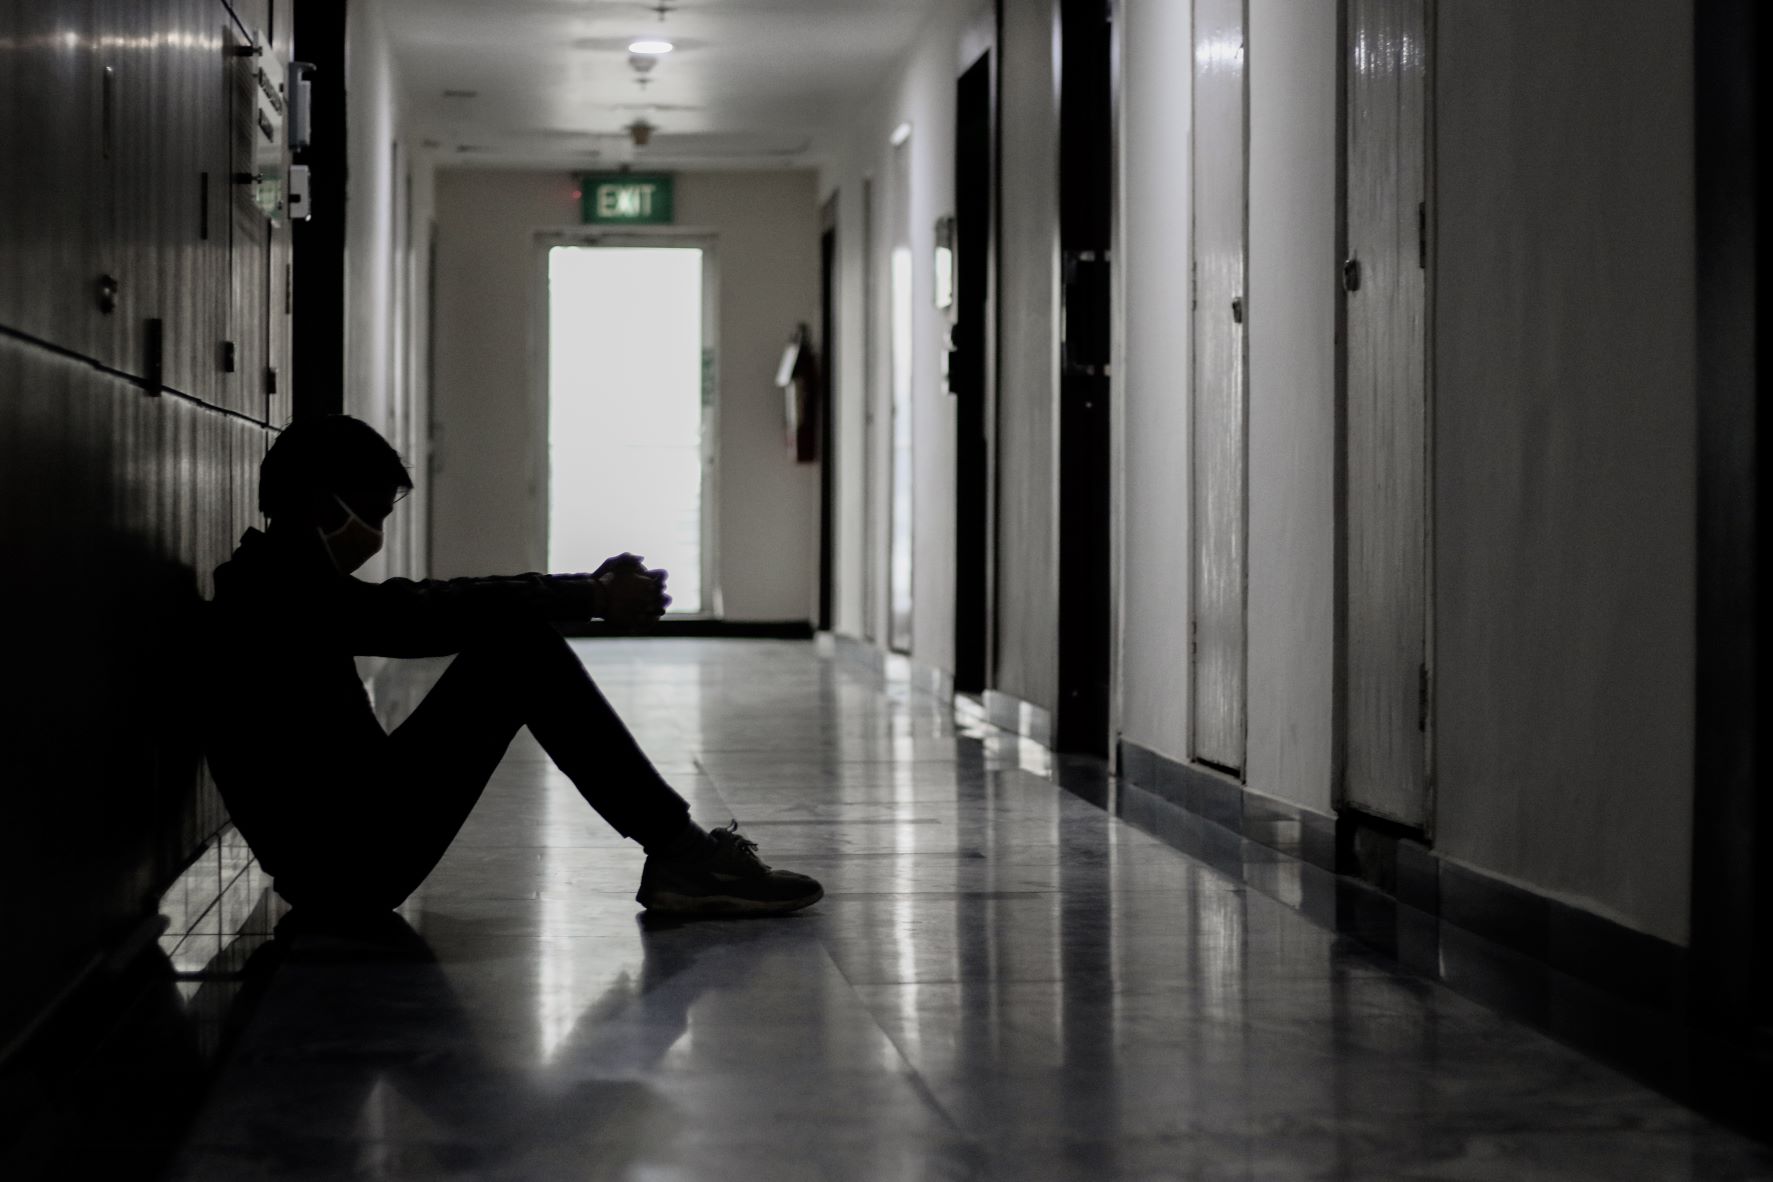 Rising suicide rates reflect mental illness: GoodLives